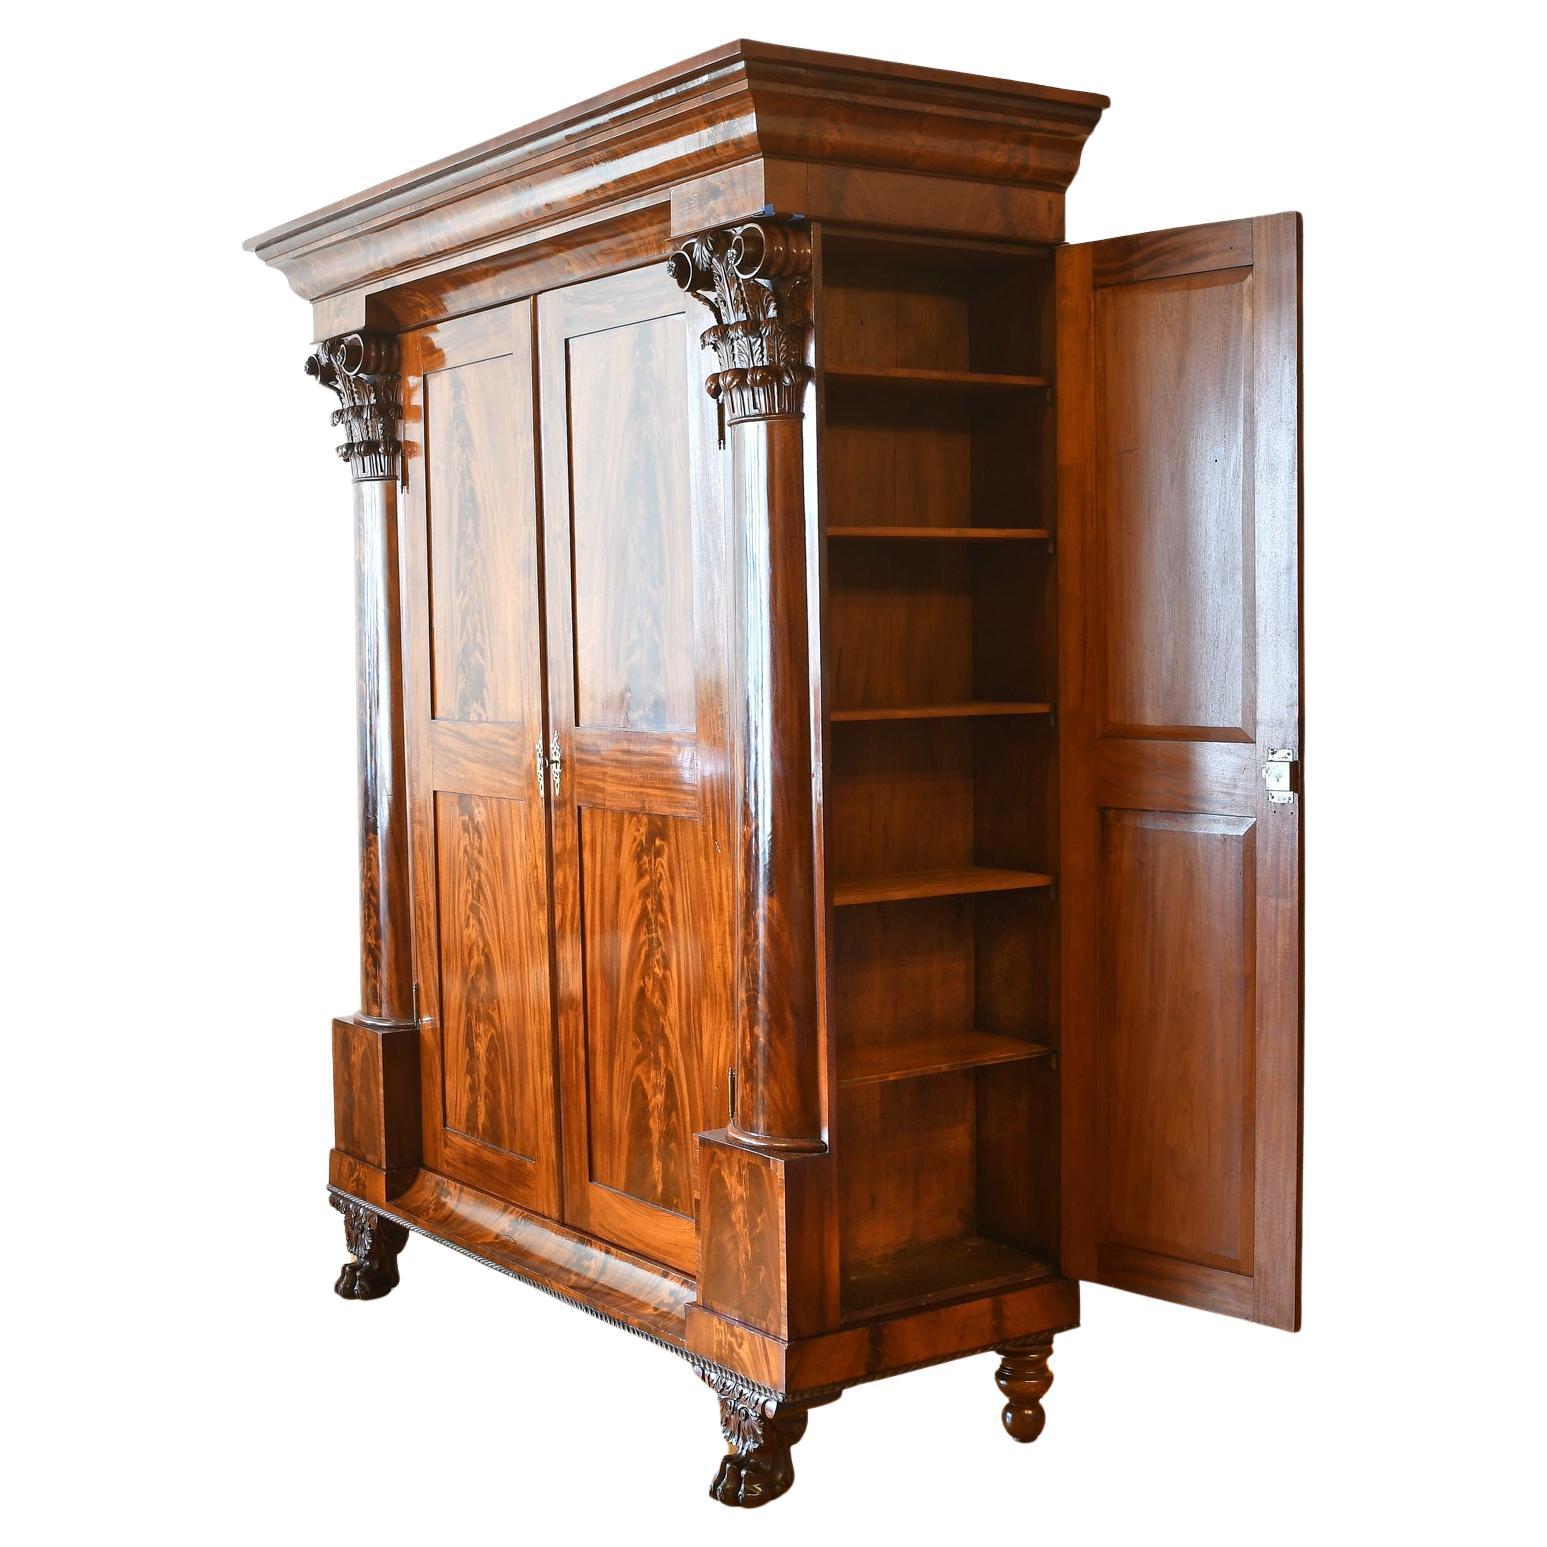 Polished Philadelphia Federal Wardrobe / Armoire in West Indies Mahogany c. !820 For Sale